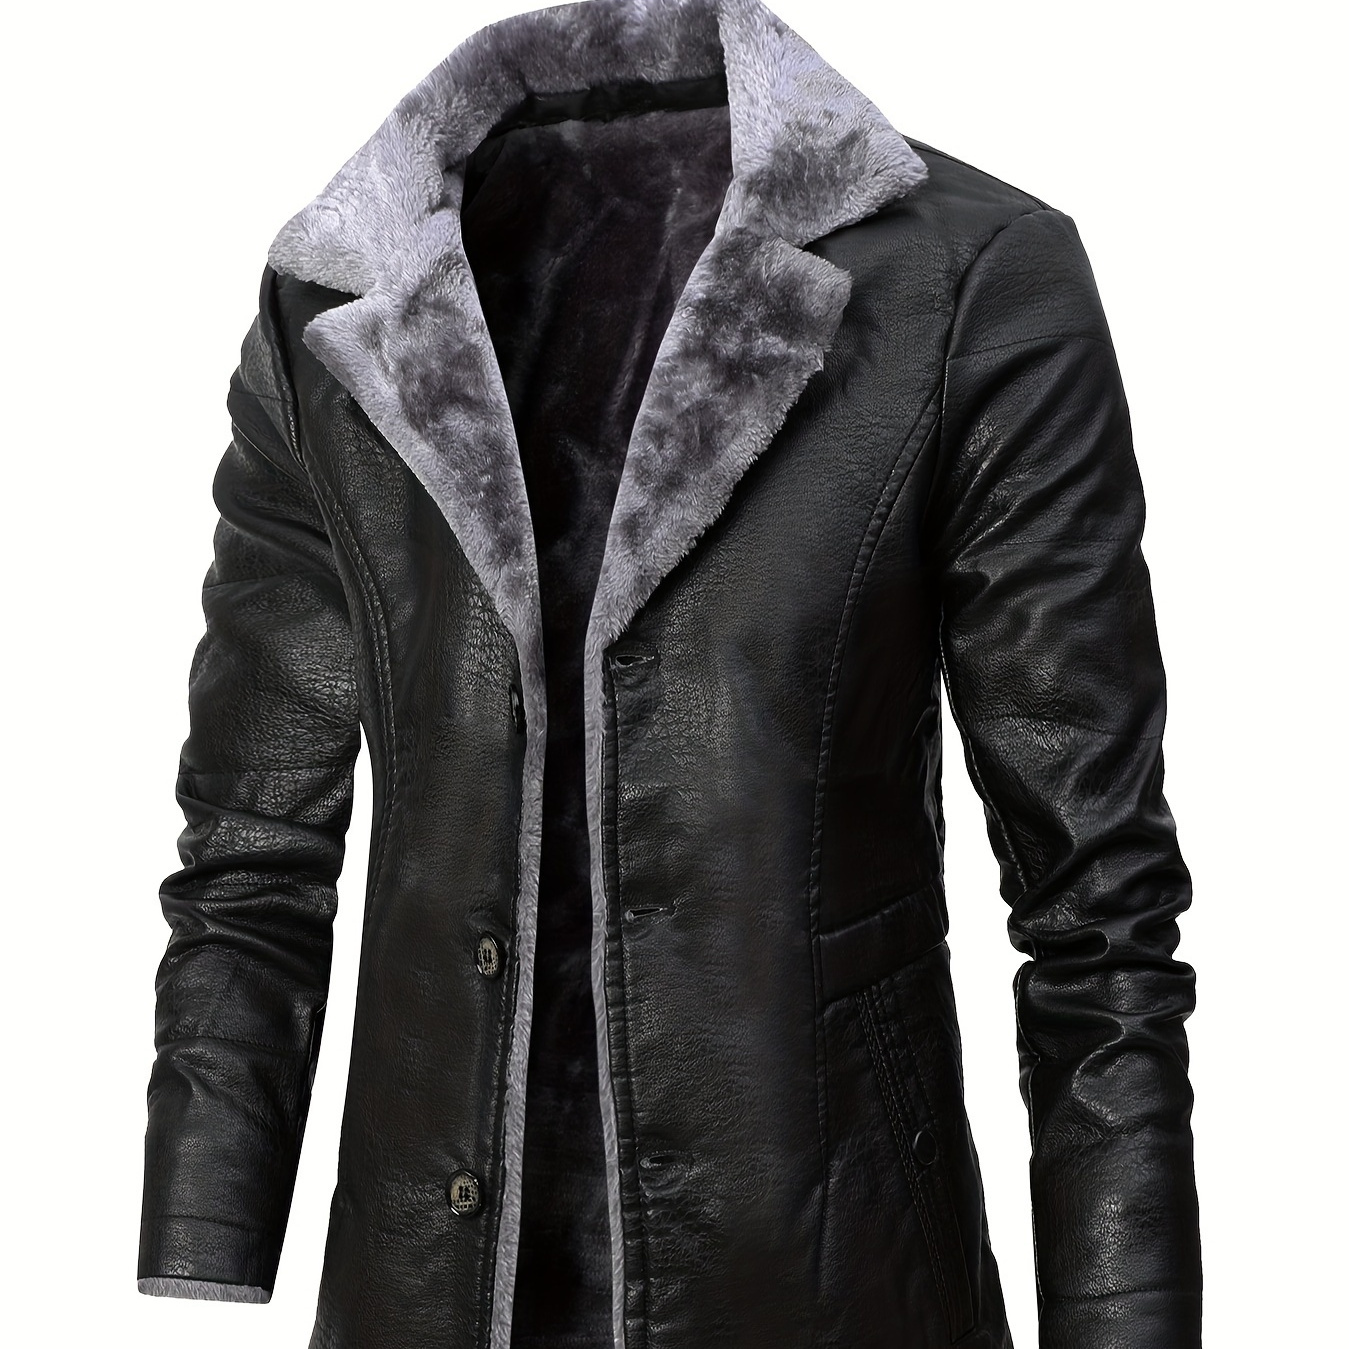 

Men's Casual Warm Fleece Lined Pu Leather Jacket, Chic Button Up Overcoat